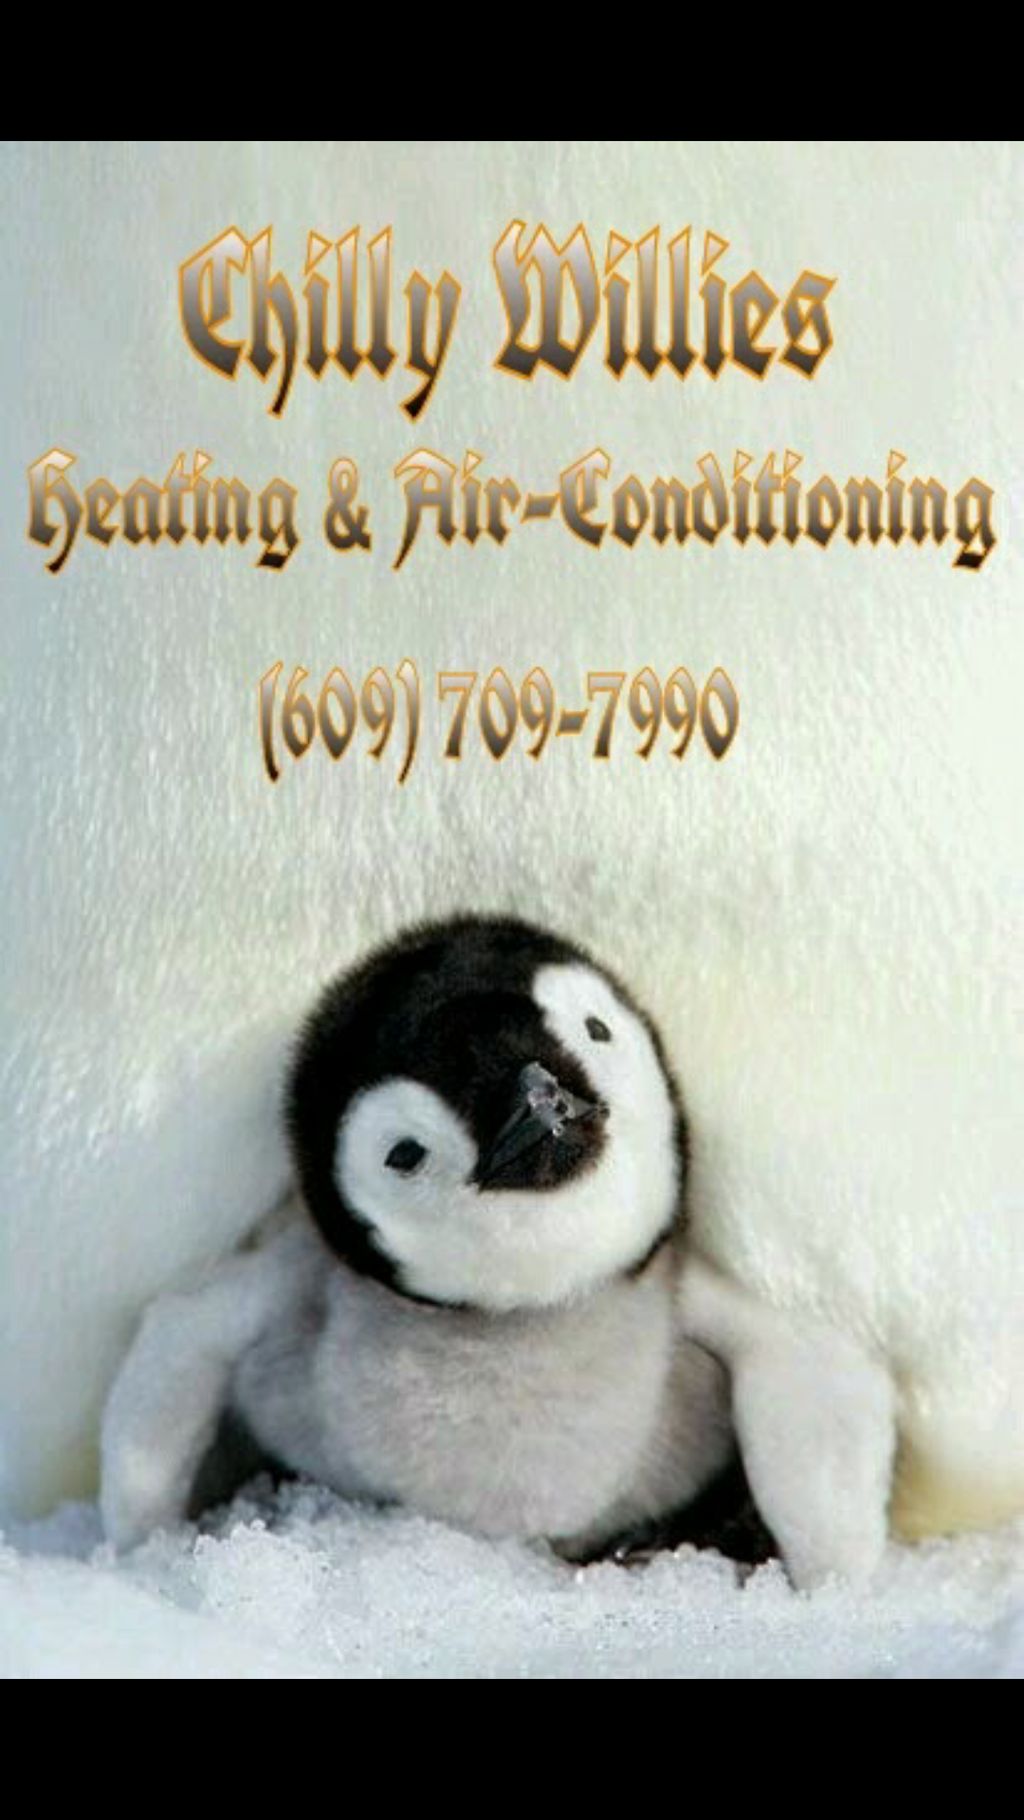 Chilly Willies Heating and Air Conditioning